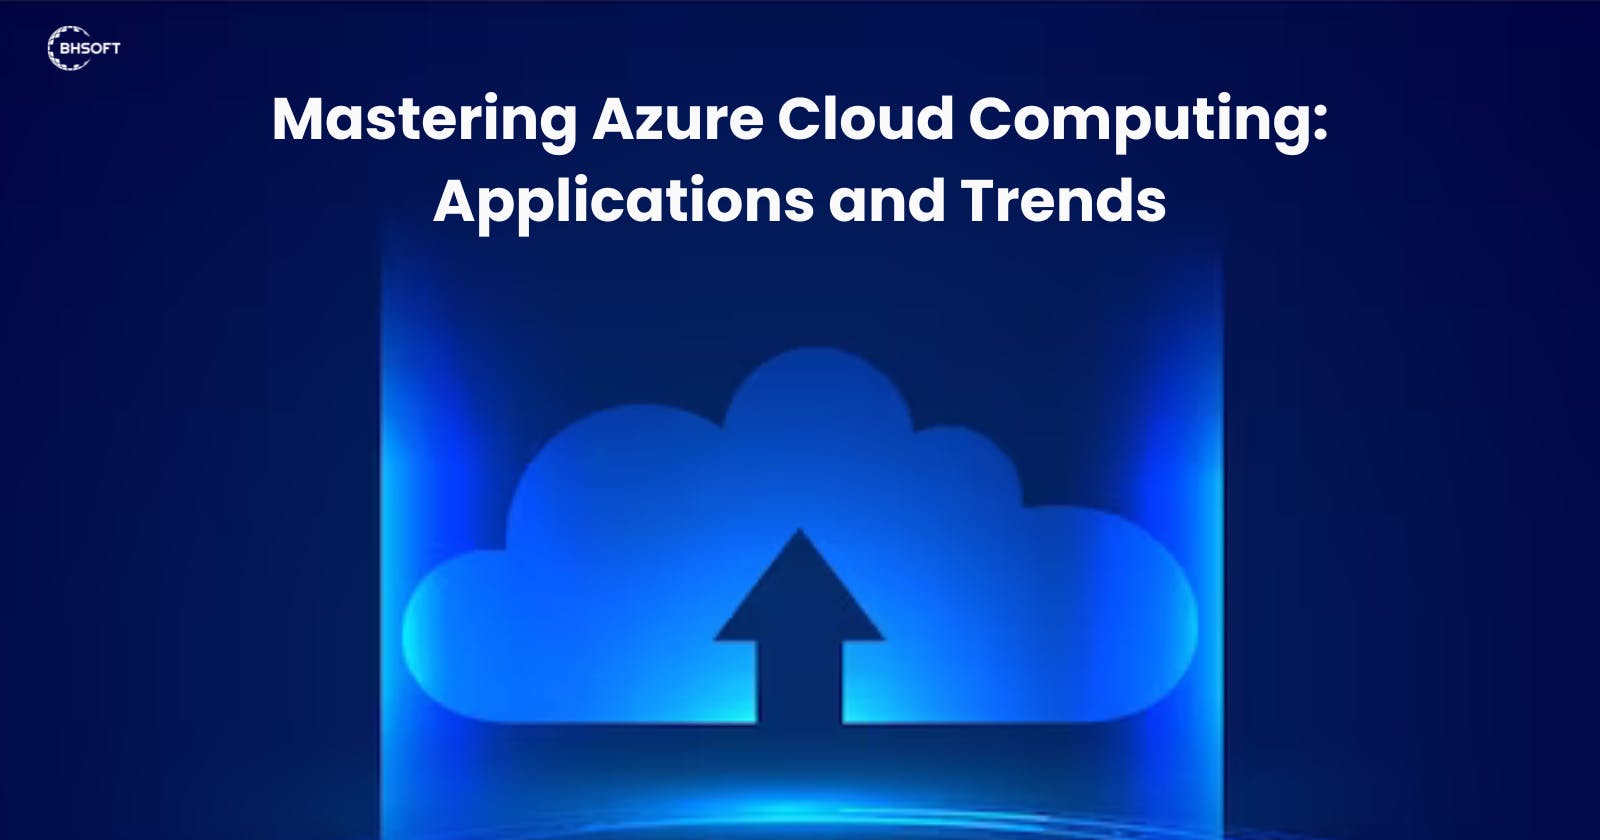 Mastering Azure Cloud Computing: Applications and Trends